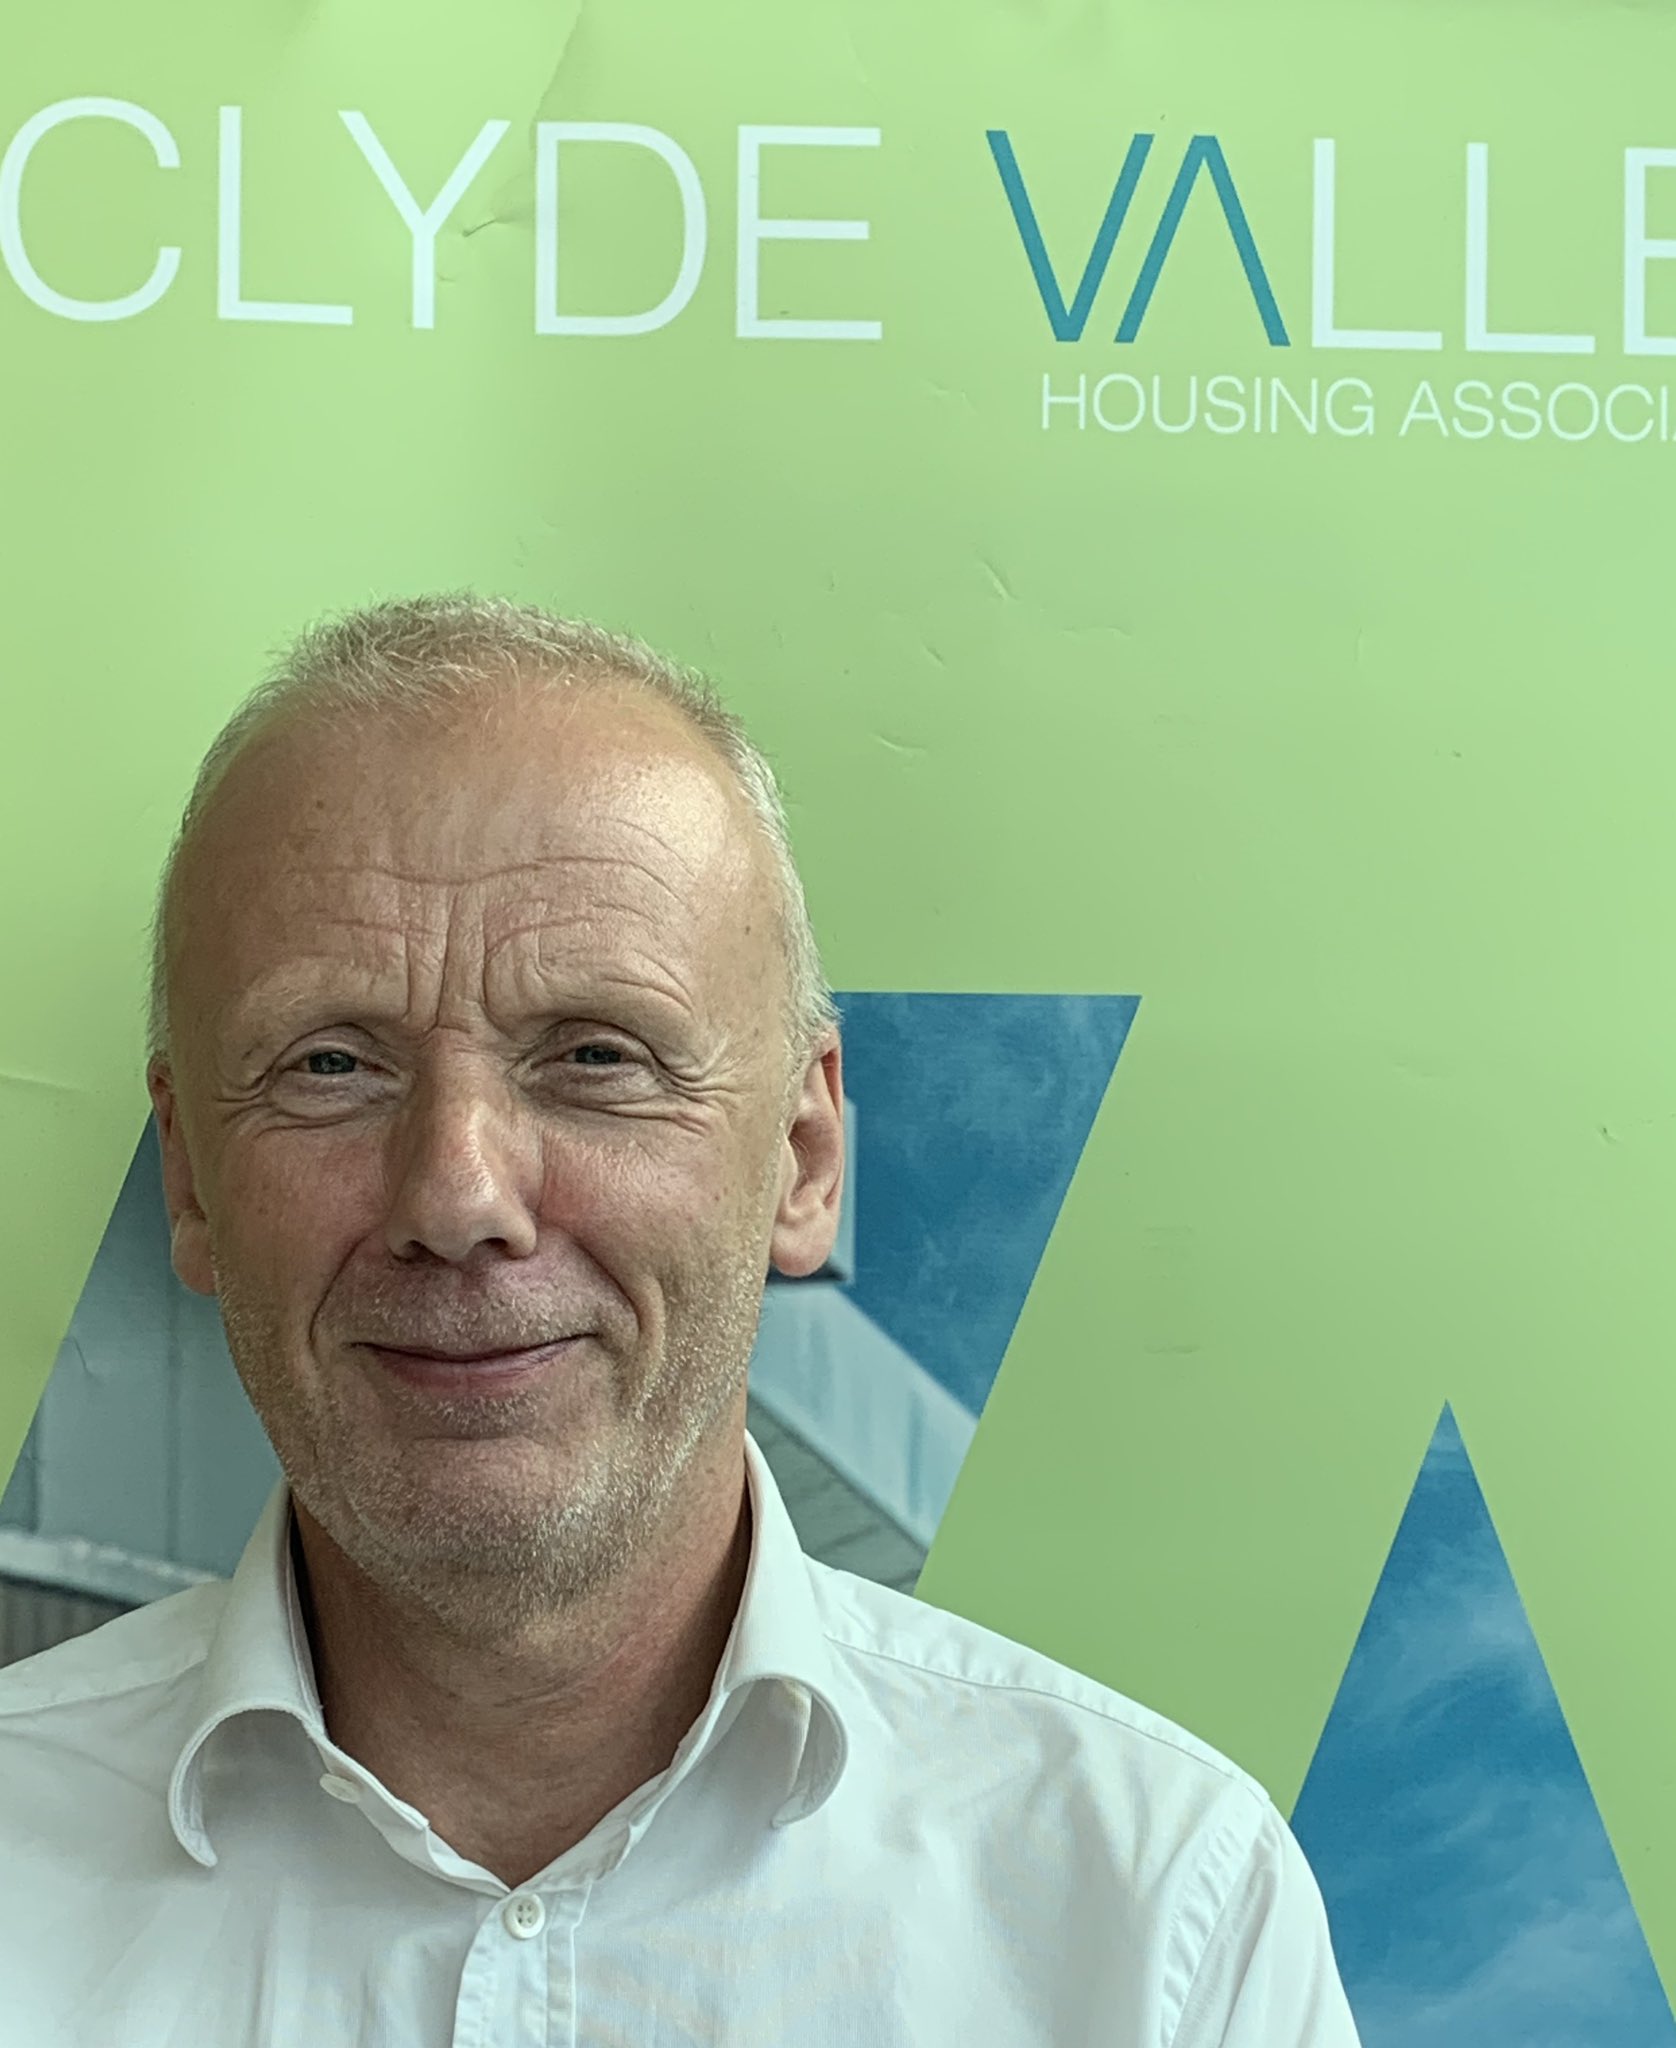 Clyde Valley Group welcomes John Duncan as new development and property director